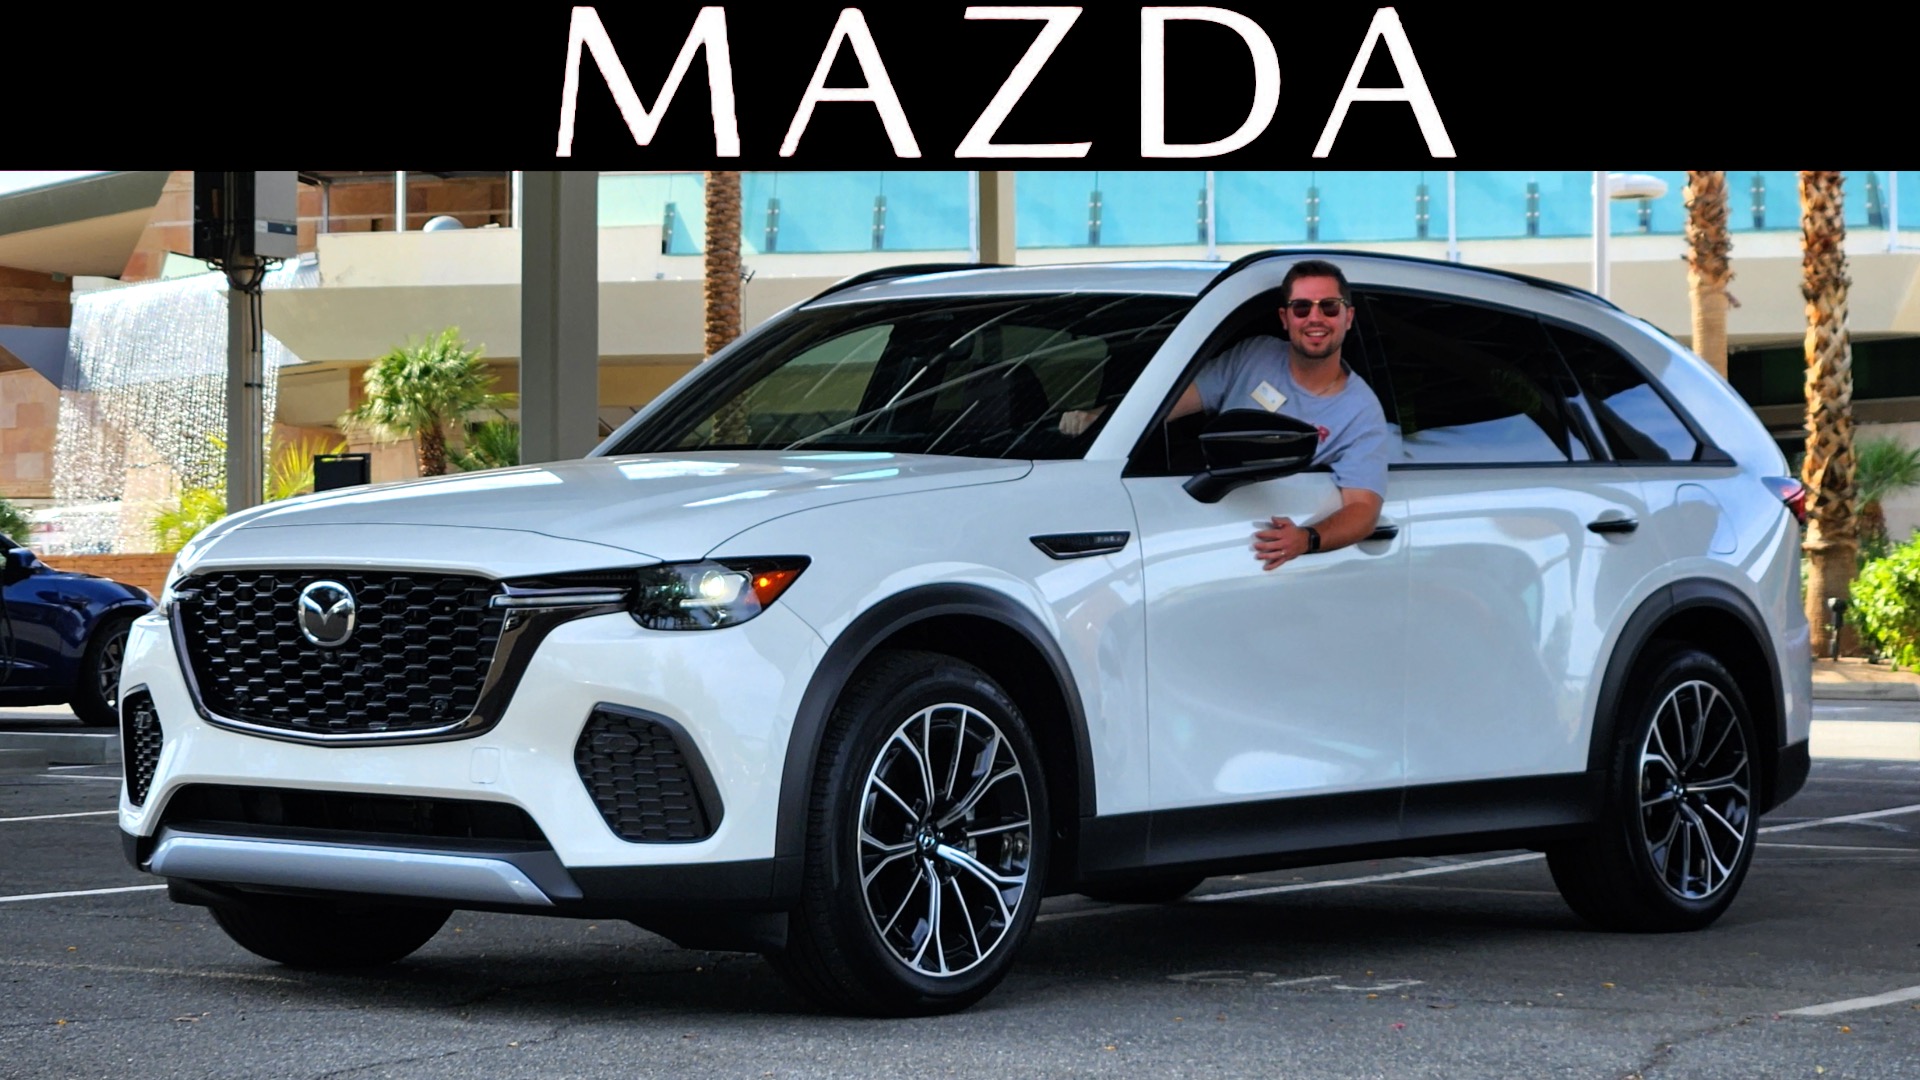 2025 Mazda CX-70: Full Details on the Newest Mazda!